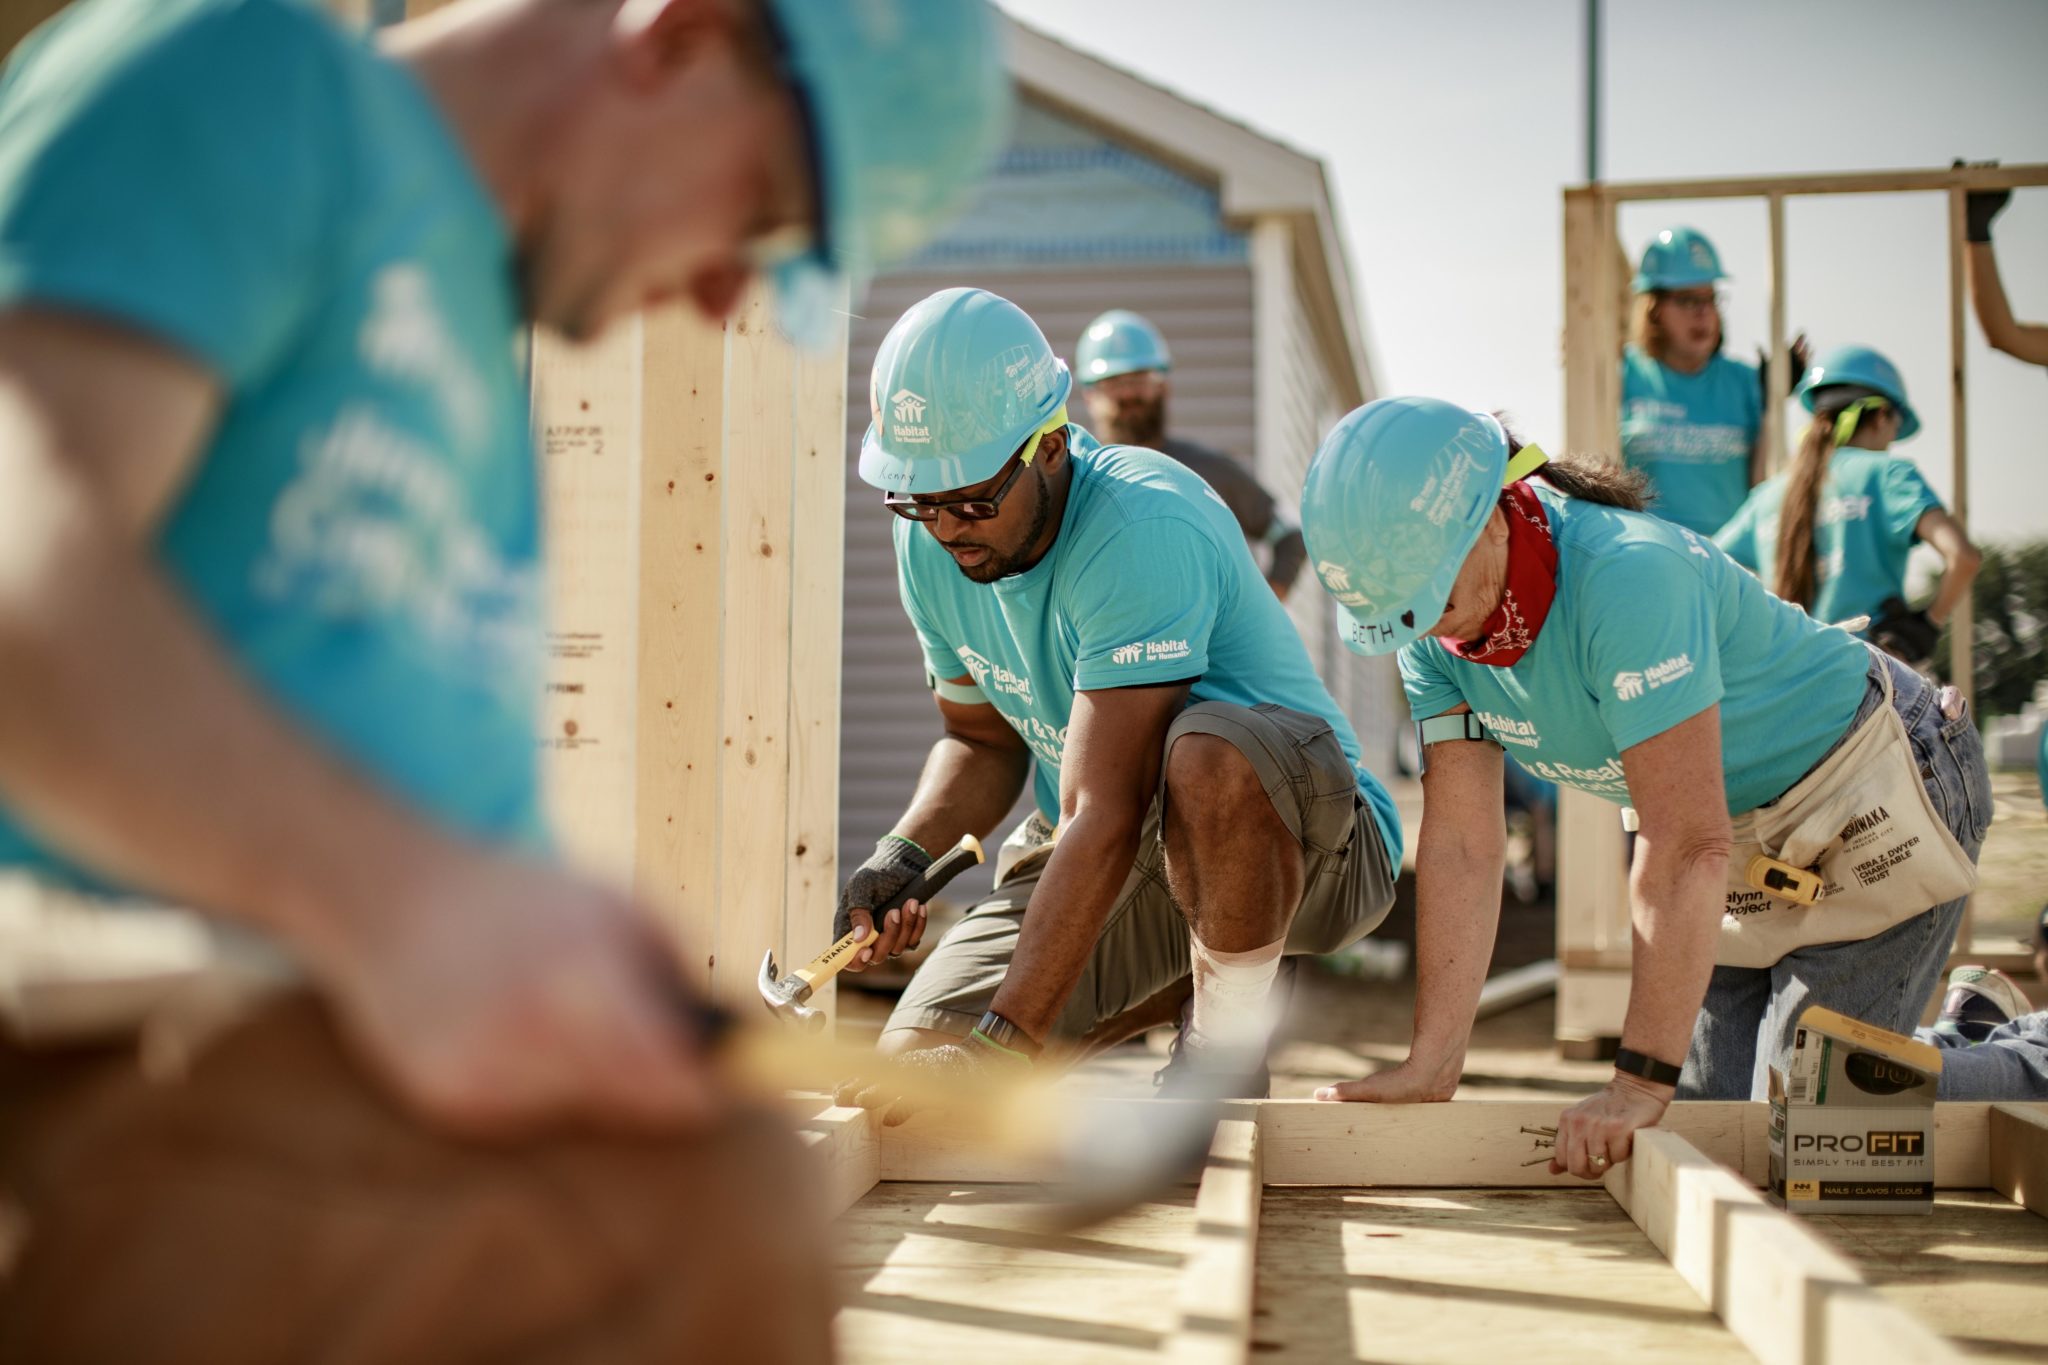 Habitat for Humanity build with staff and volunteers; Habitat Halton-Mississauga-Dufferin provides housing solutions in Halton region, Dufferin County and the City of Mississauga